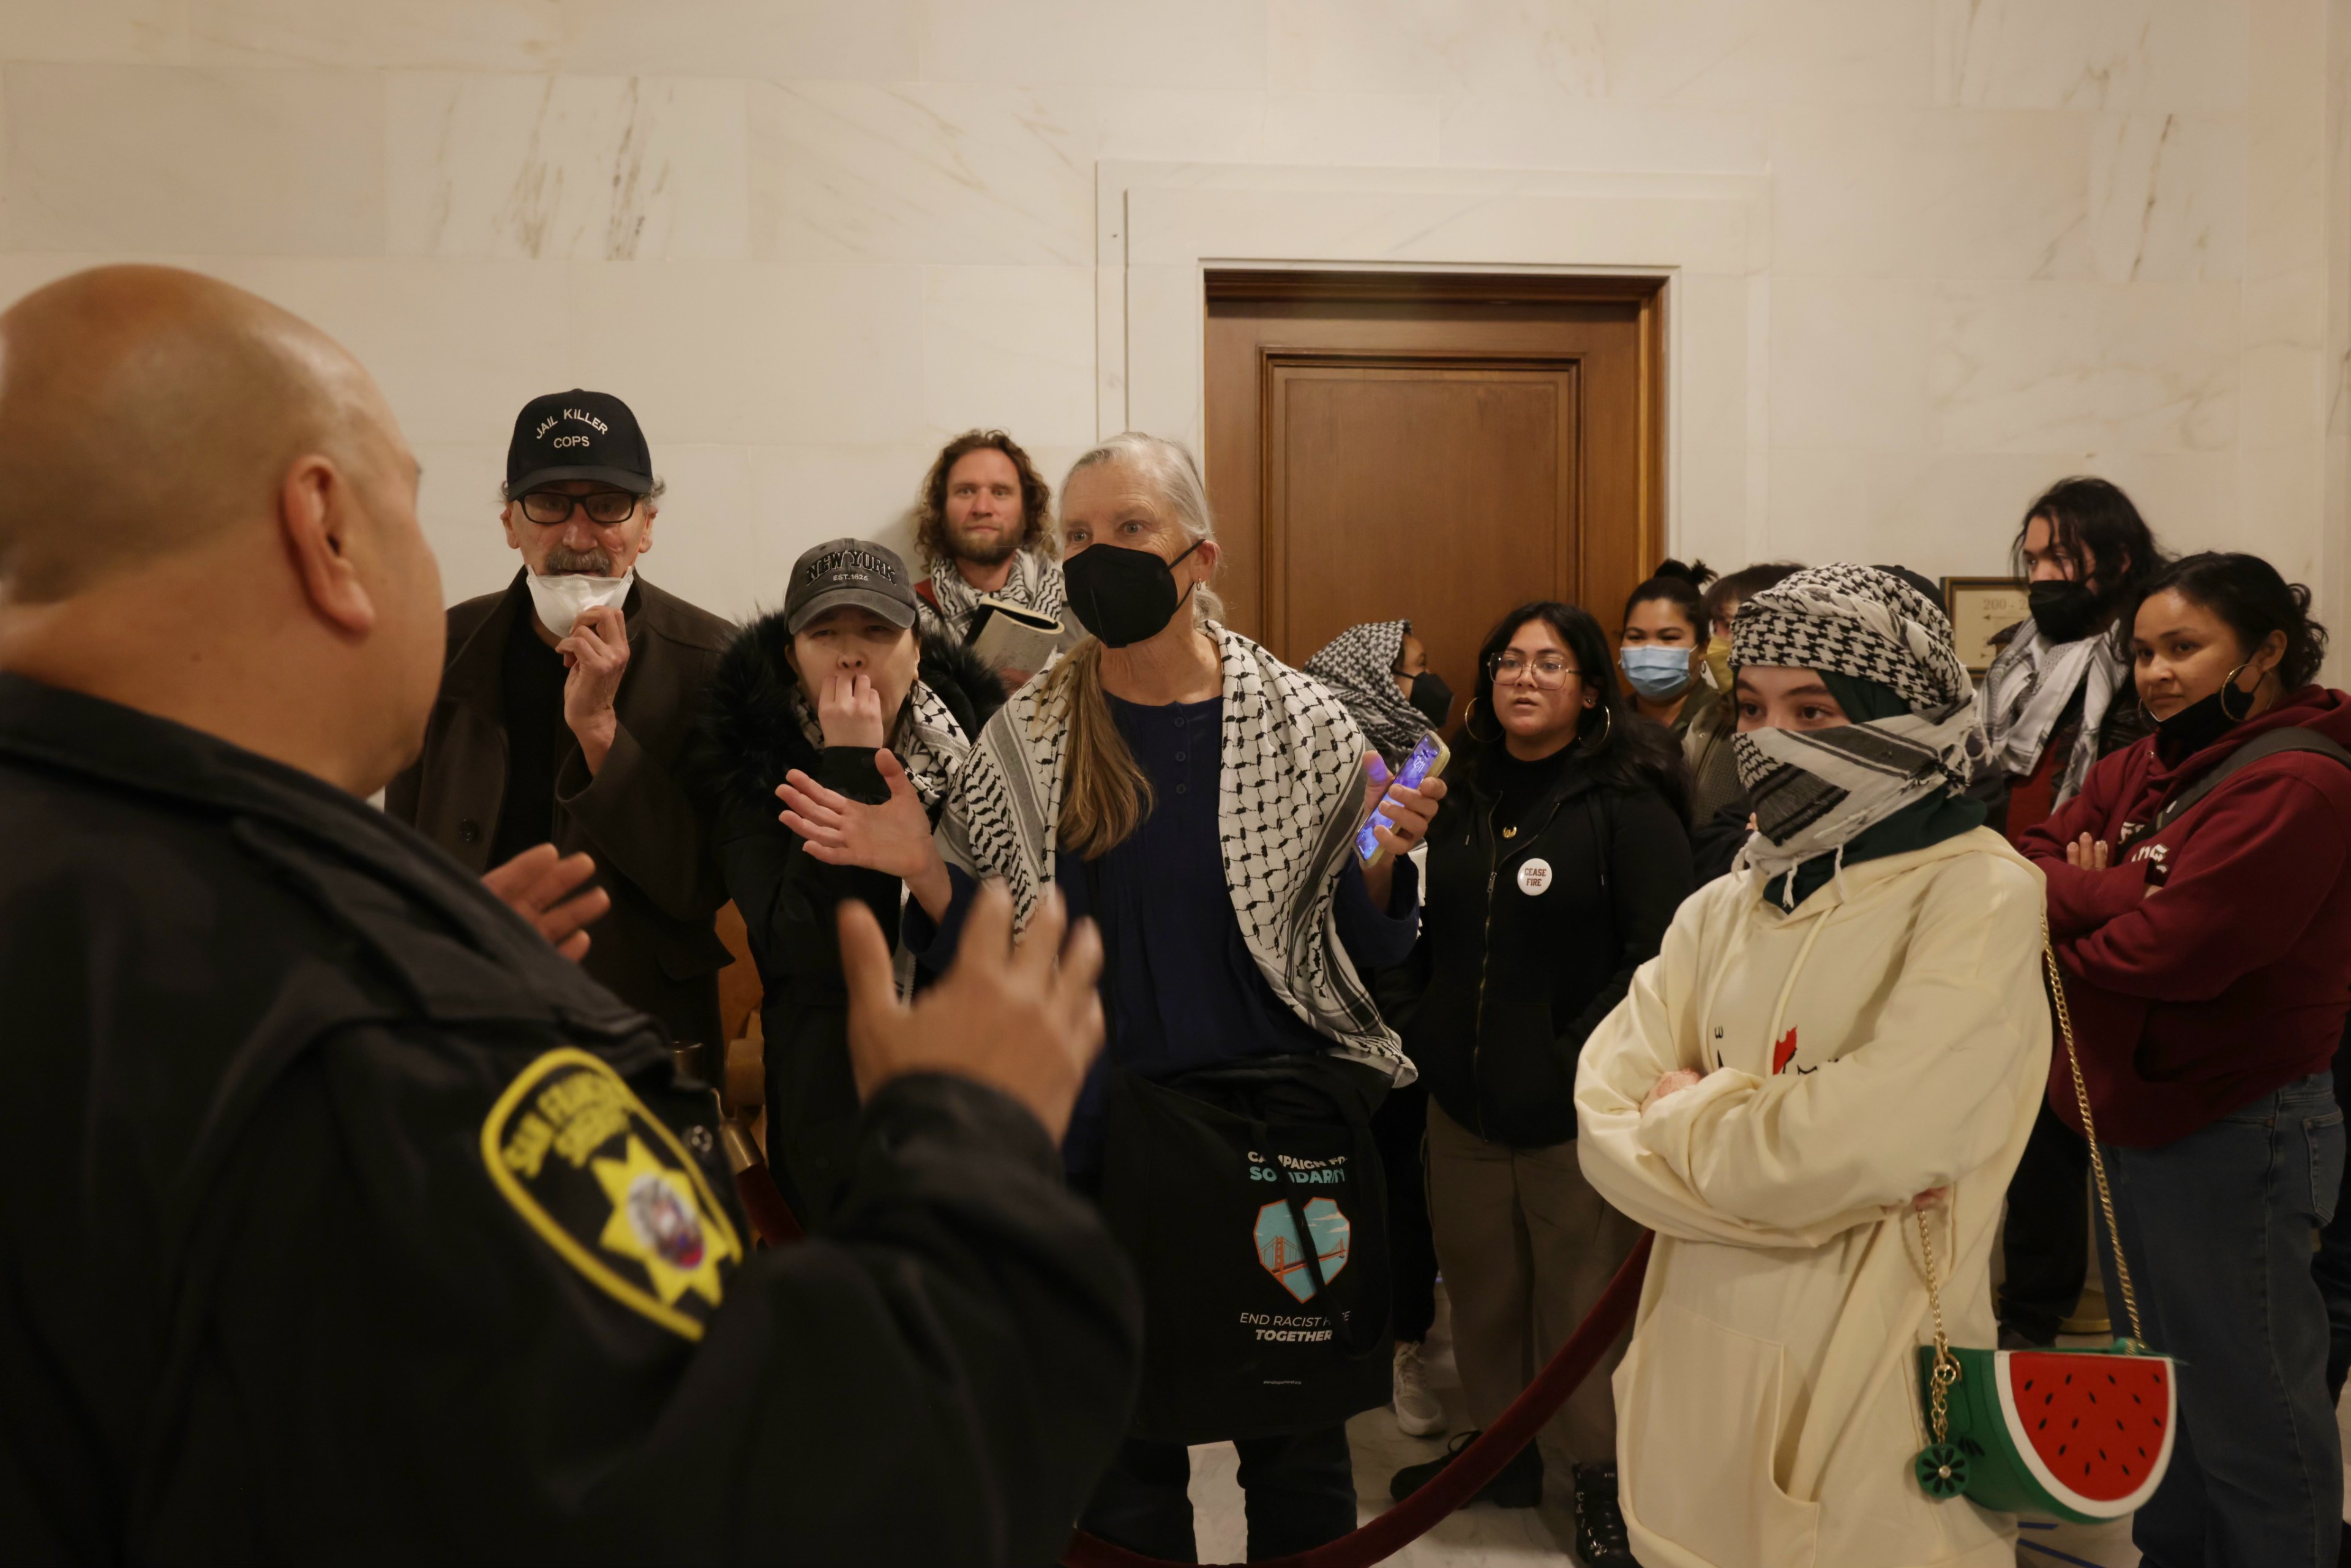 Scores of activists packed City Hall Monday to push San Francisco lawmakers to pass a resolution calling for a cease-fire in Gaza.